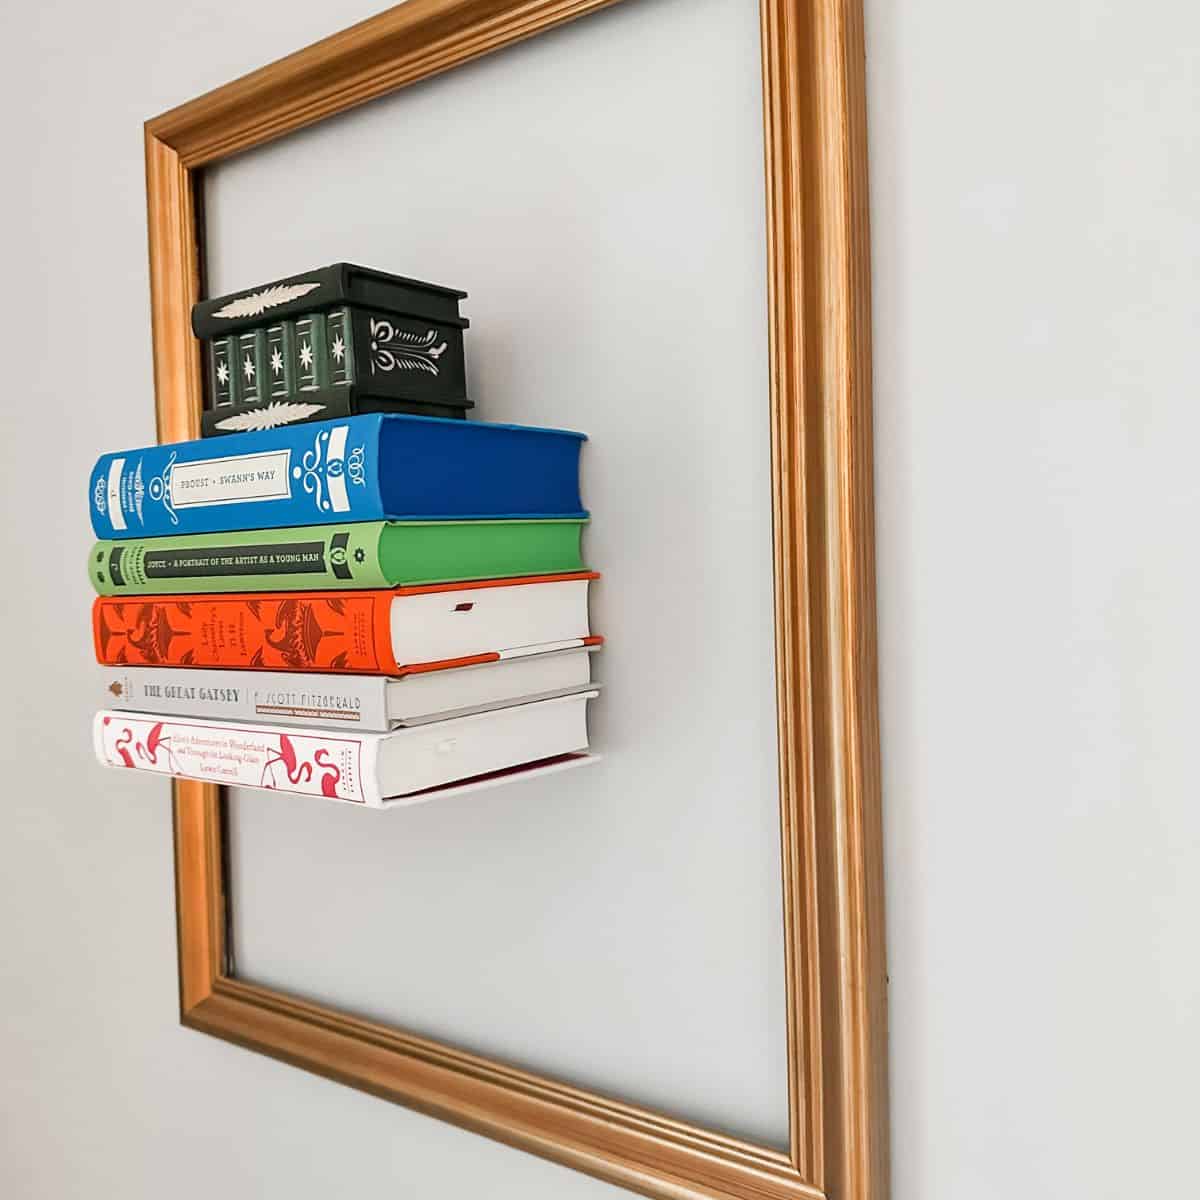 books on invisible floating bookshelf with a frame around them.